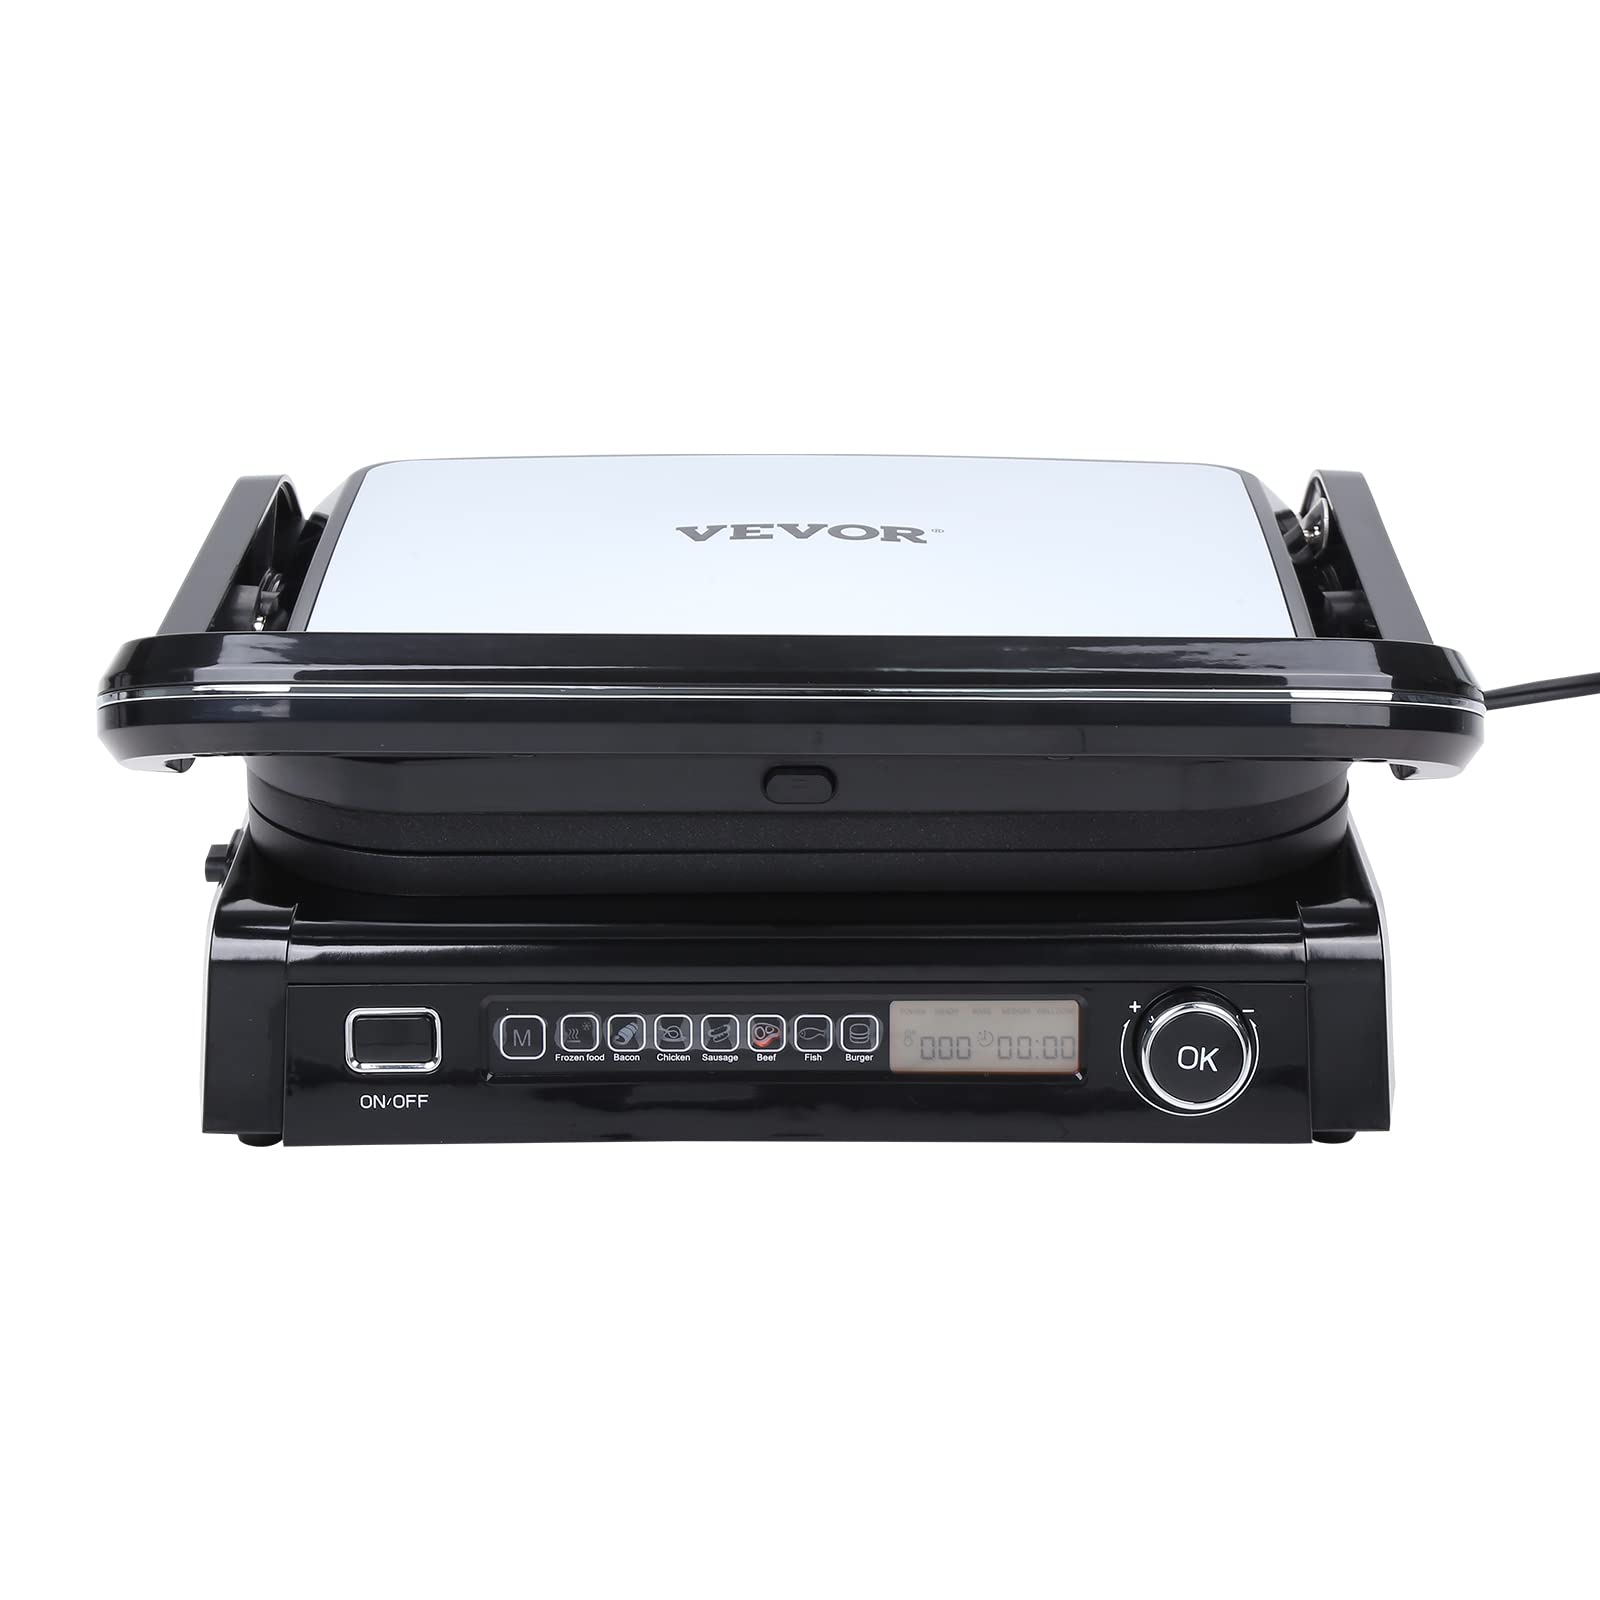 VEVOR 7 IN 1 Electric Contact Grill,1800W Indoor Panini Press Griddle,Stainless Steel Teppanyaki Grill with Nonstick&Removable Iron Plate, 0-446℉ Adjustable Temp Control,LCD Display,110V